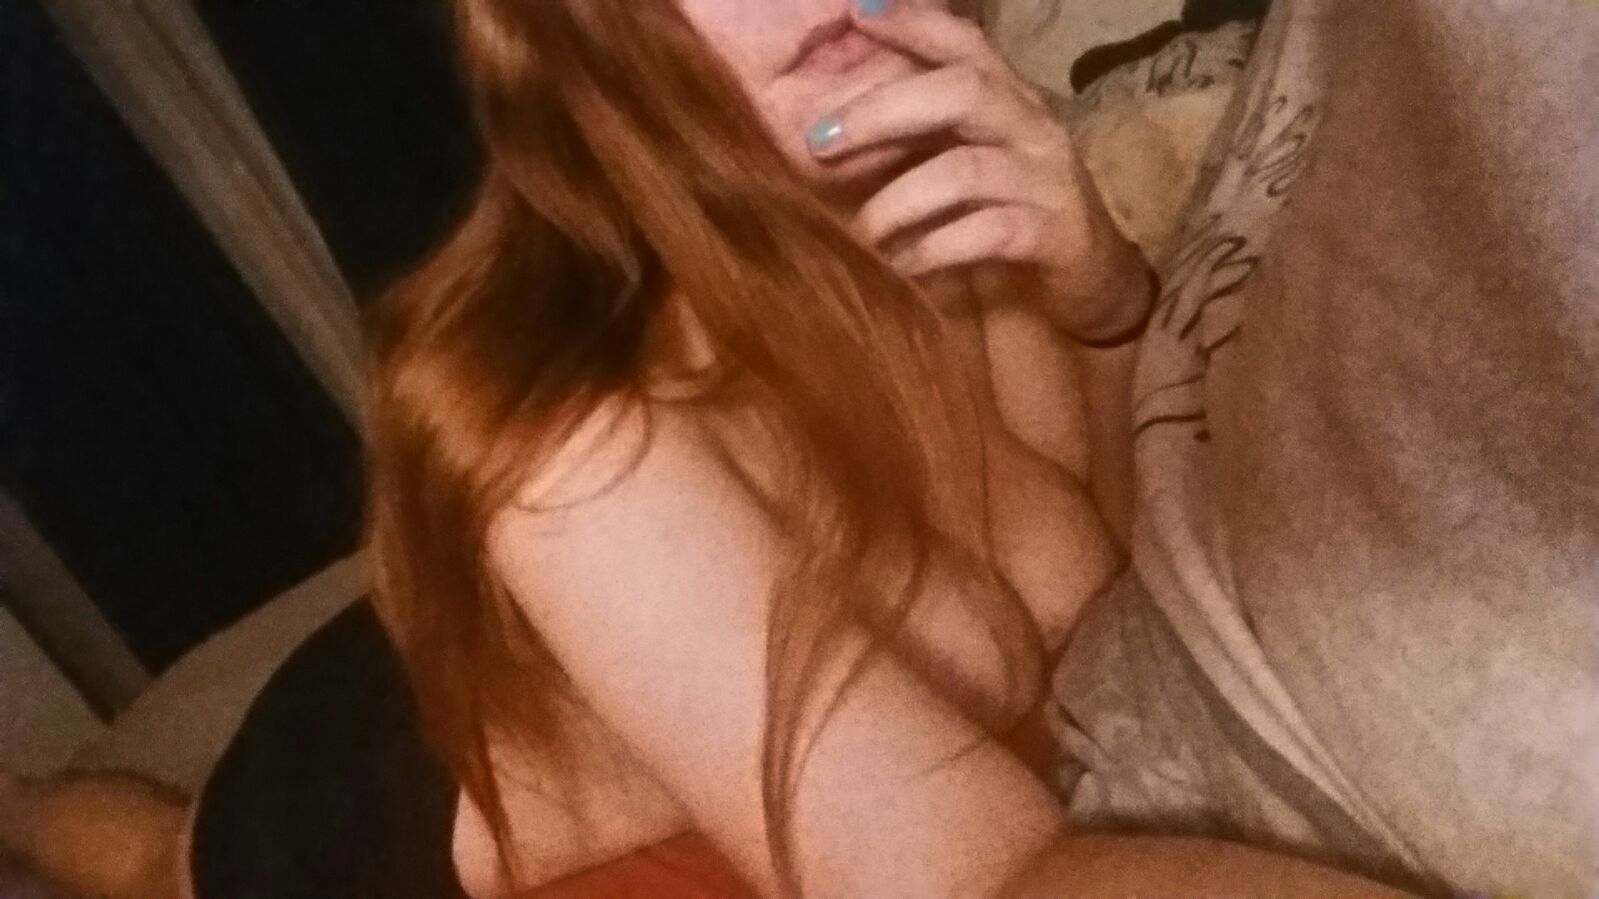 Busty Dutch redhead Slut wanted to be exposed.